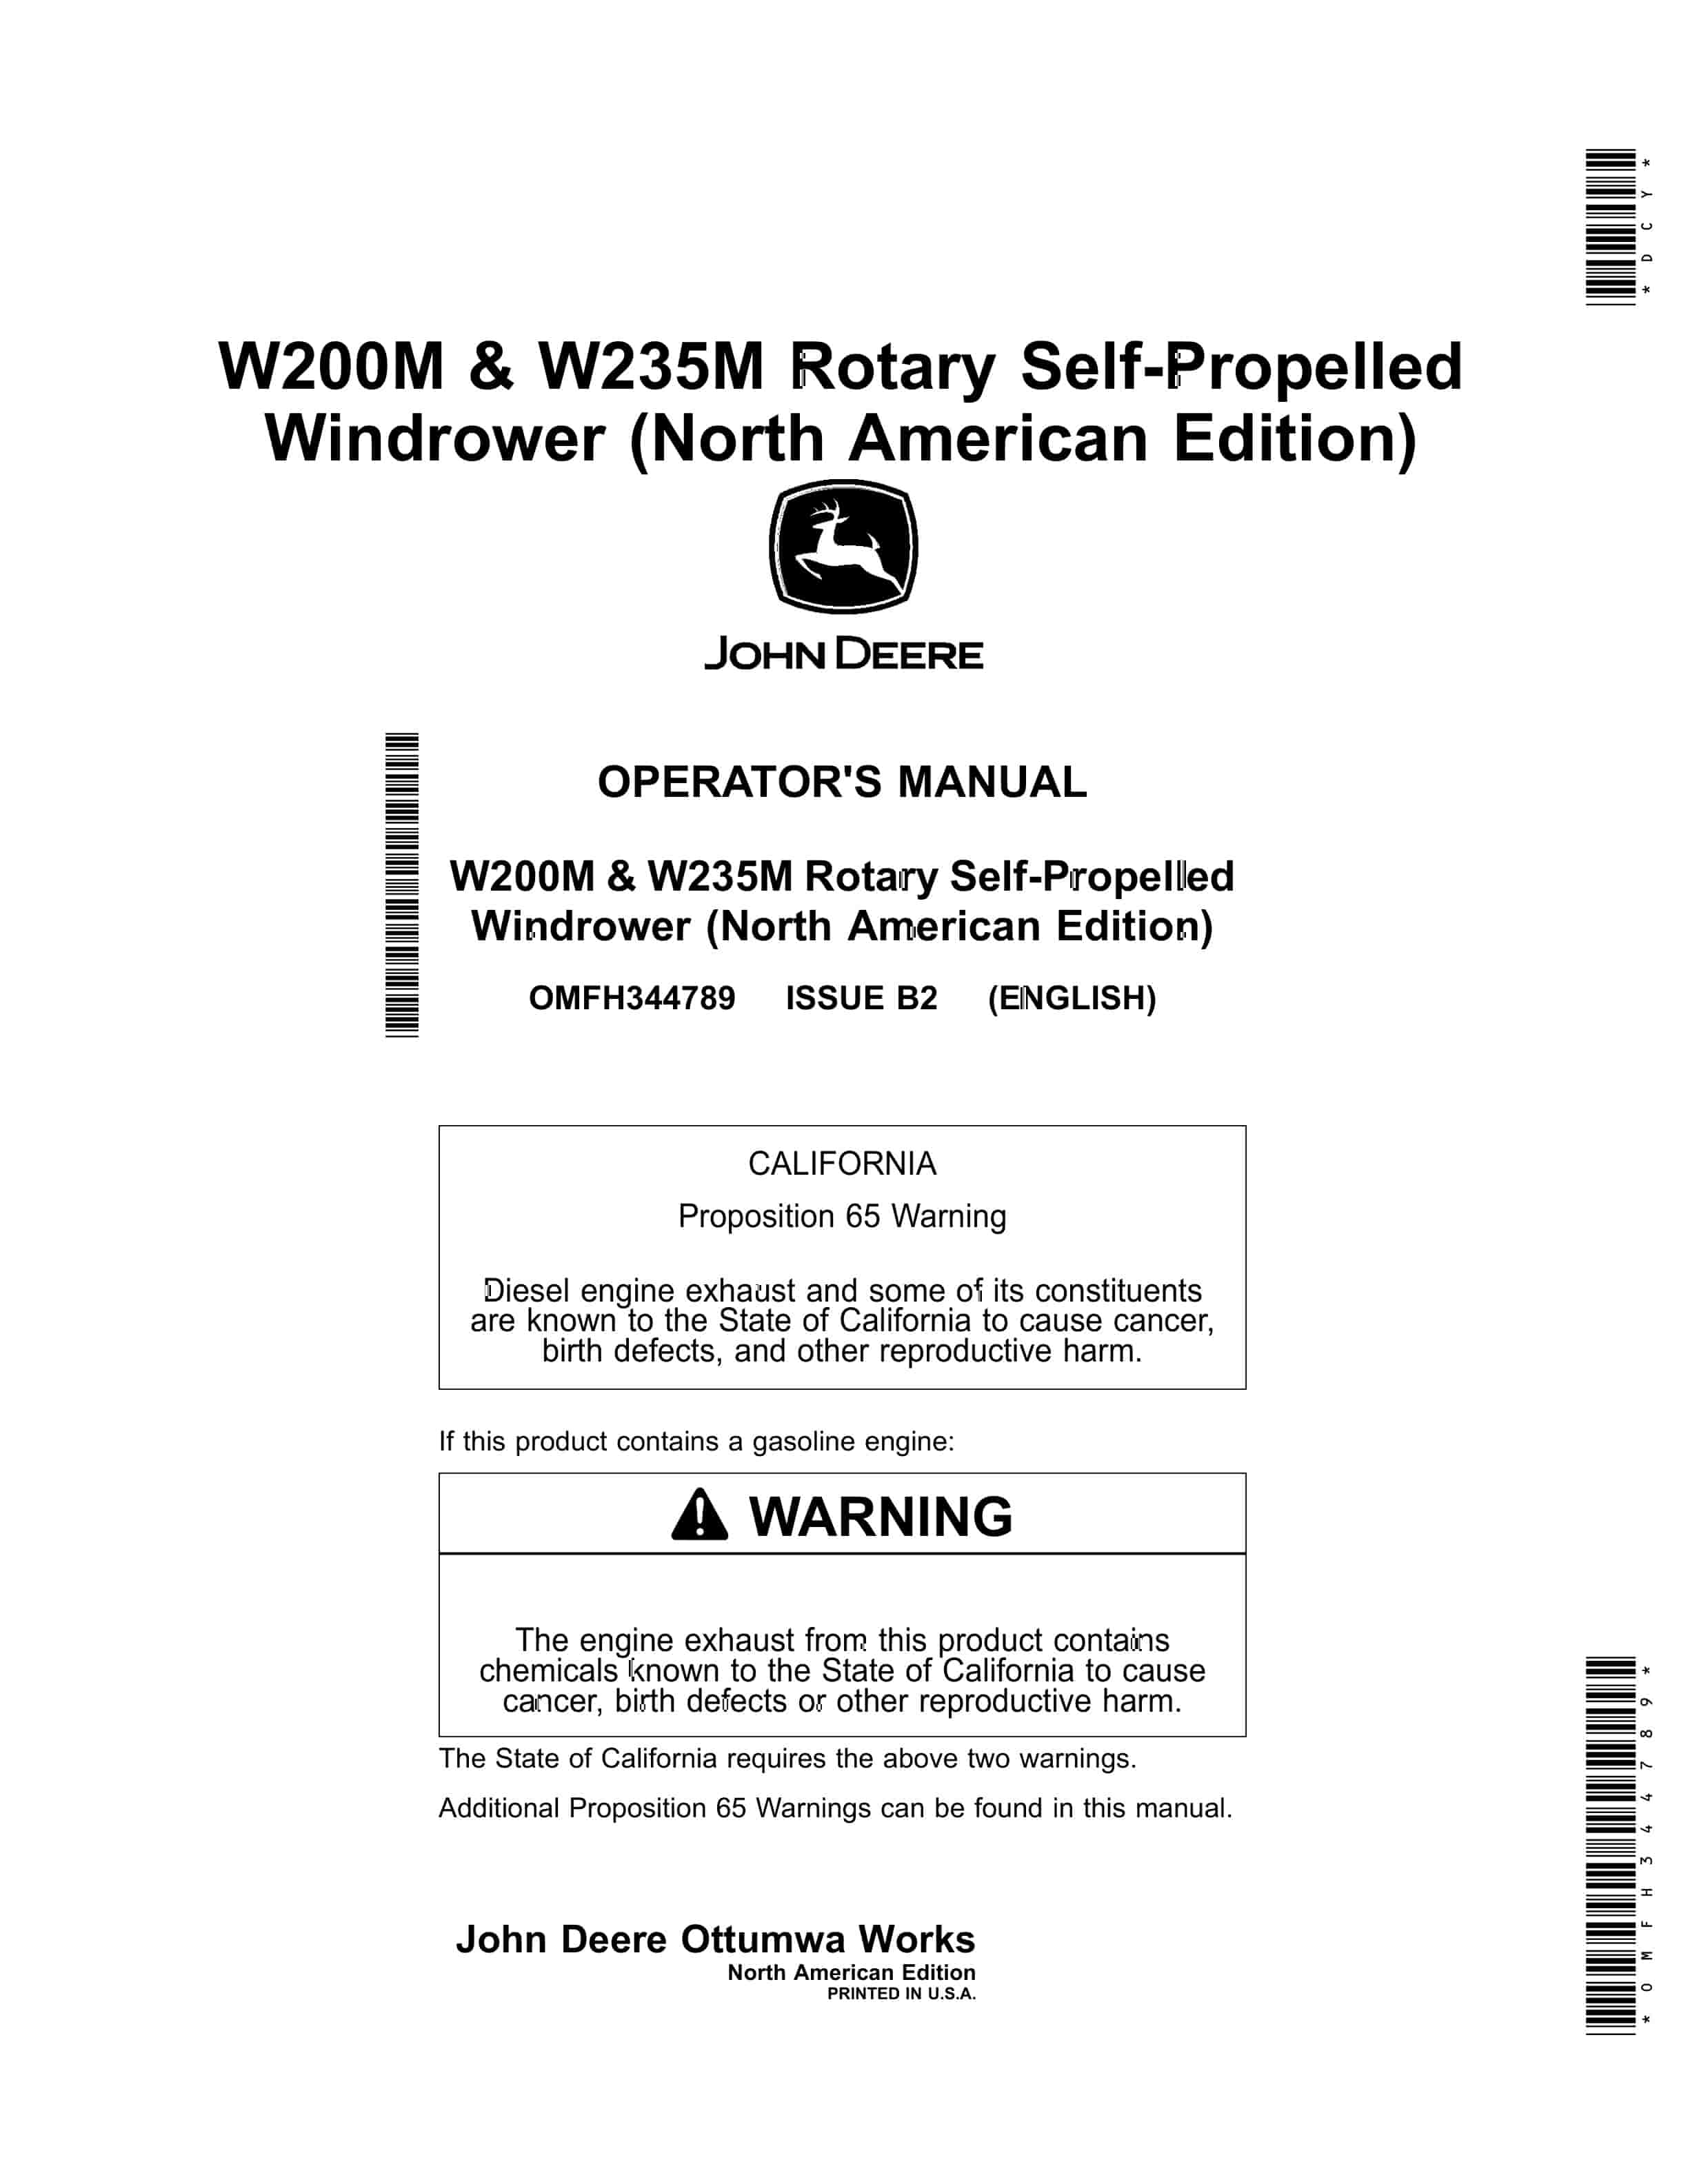 John Deere W200M and W235M Rotary Self Propelled Windrower Operator Manual OMFH344789 1